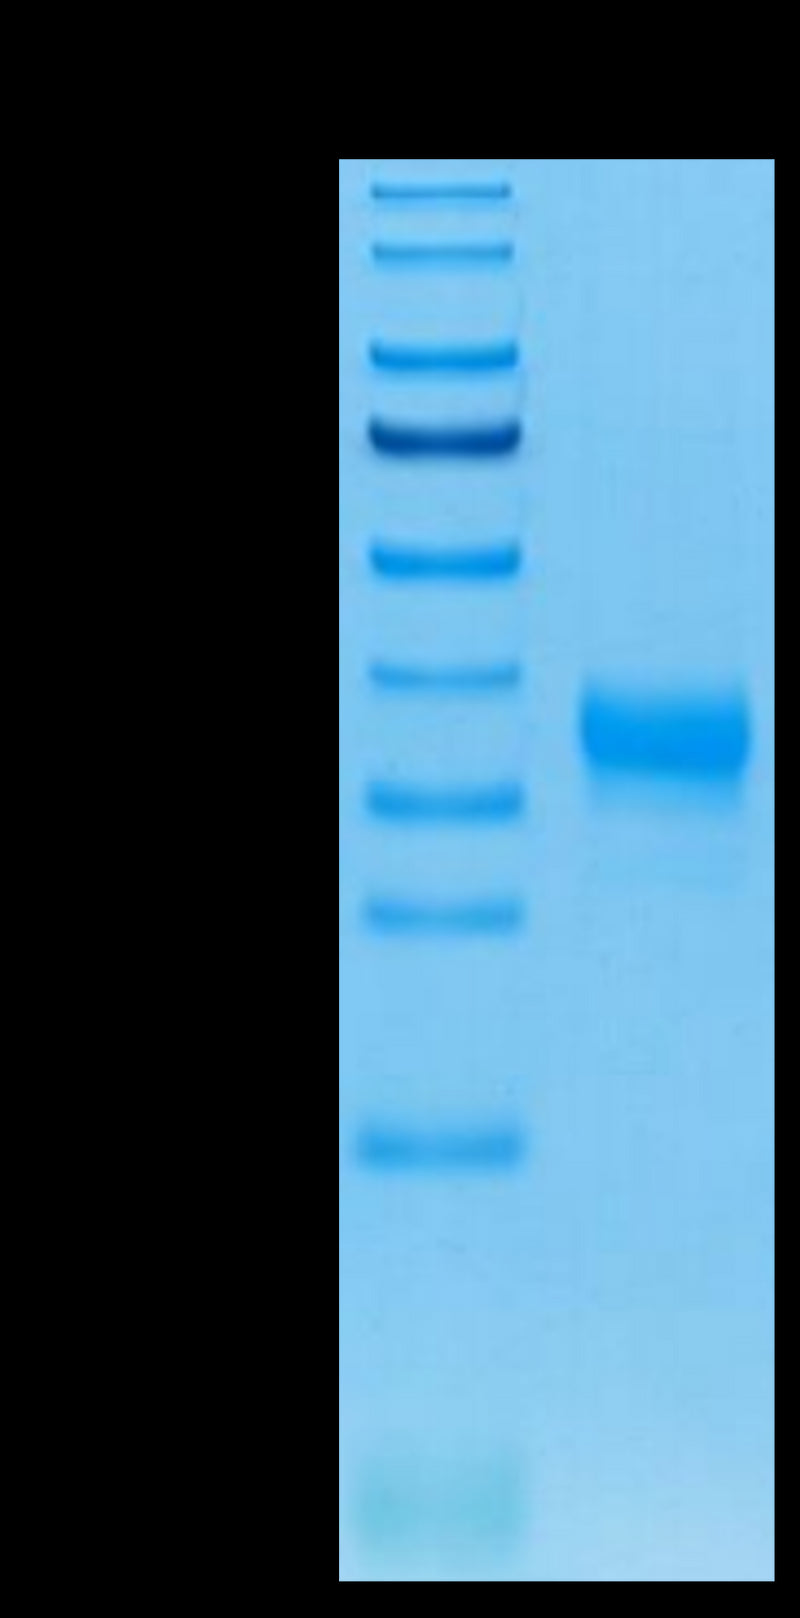 Human Fc gamma RIIA (H167) on Tris-Bis PAGE under reduced condition. The purity is greater than 95%.